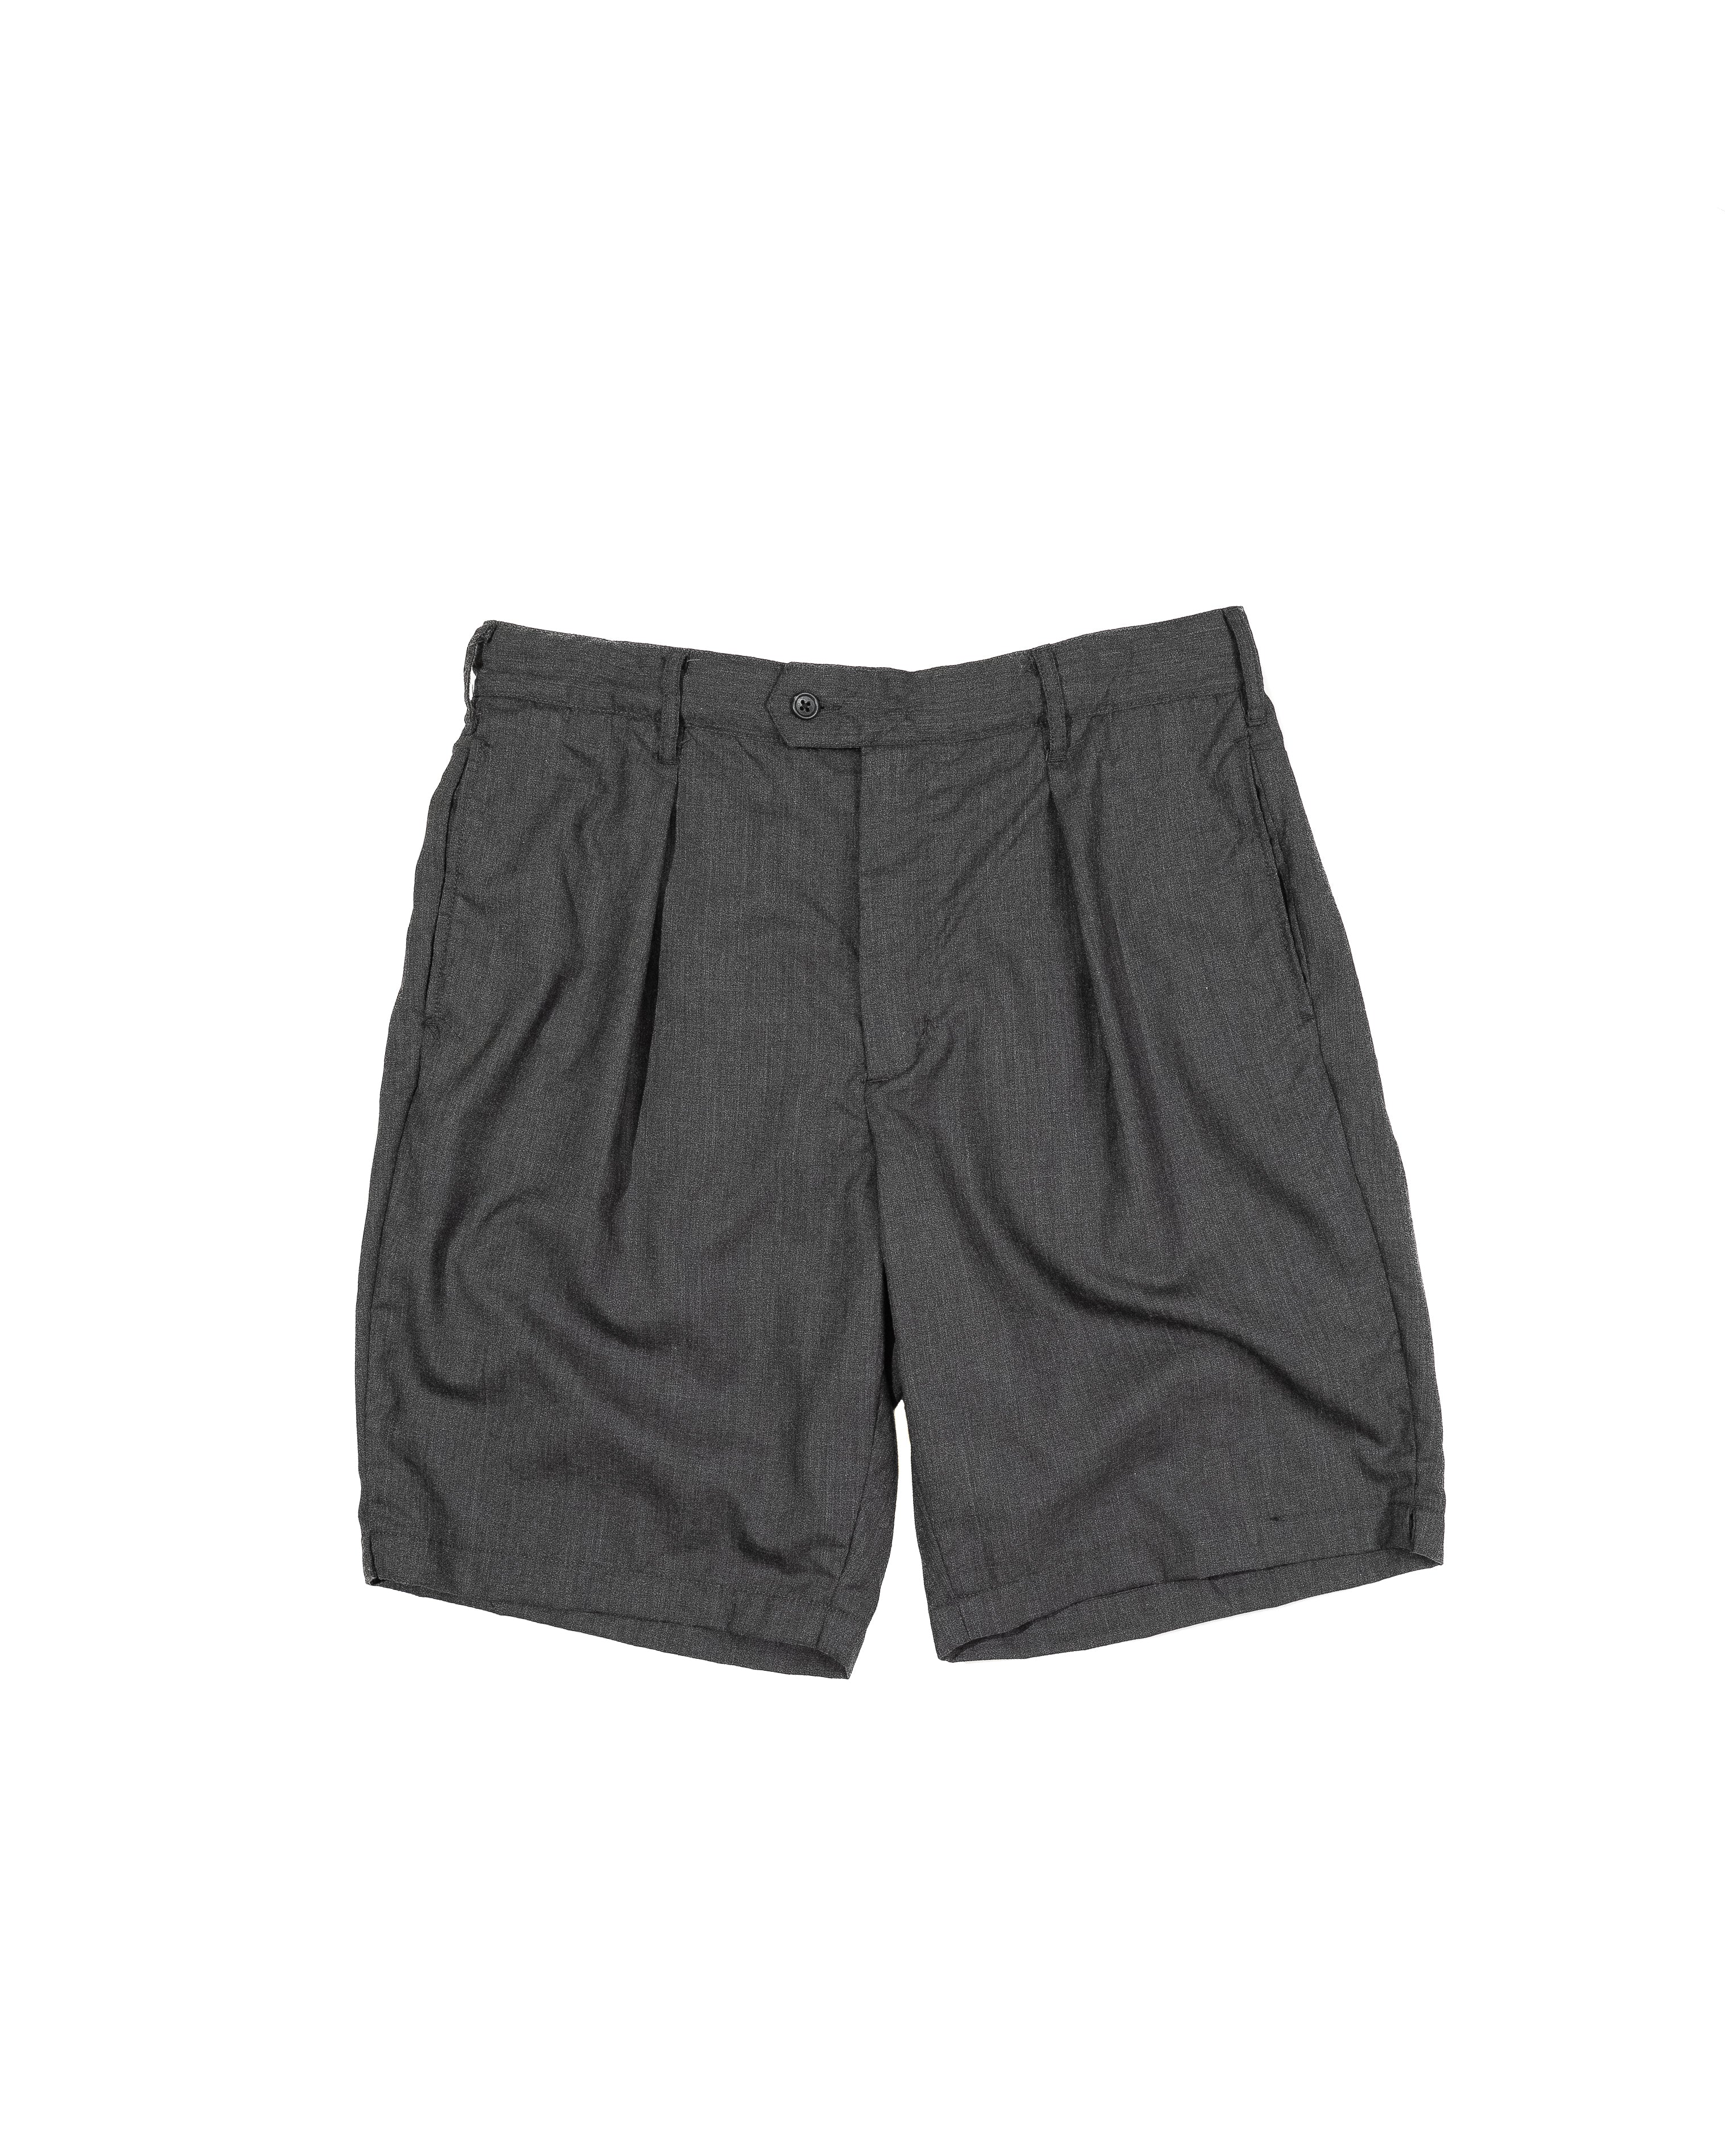 Sunset Short - Charcoal Tropical Wool